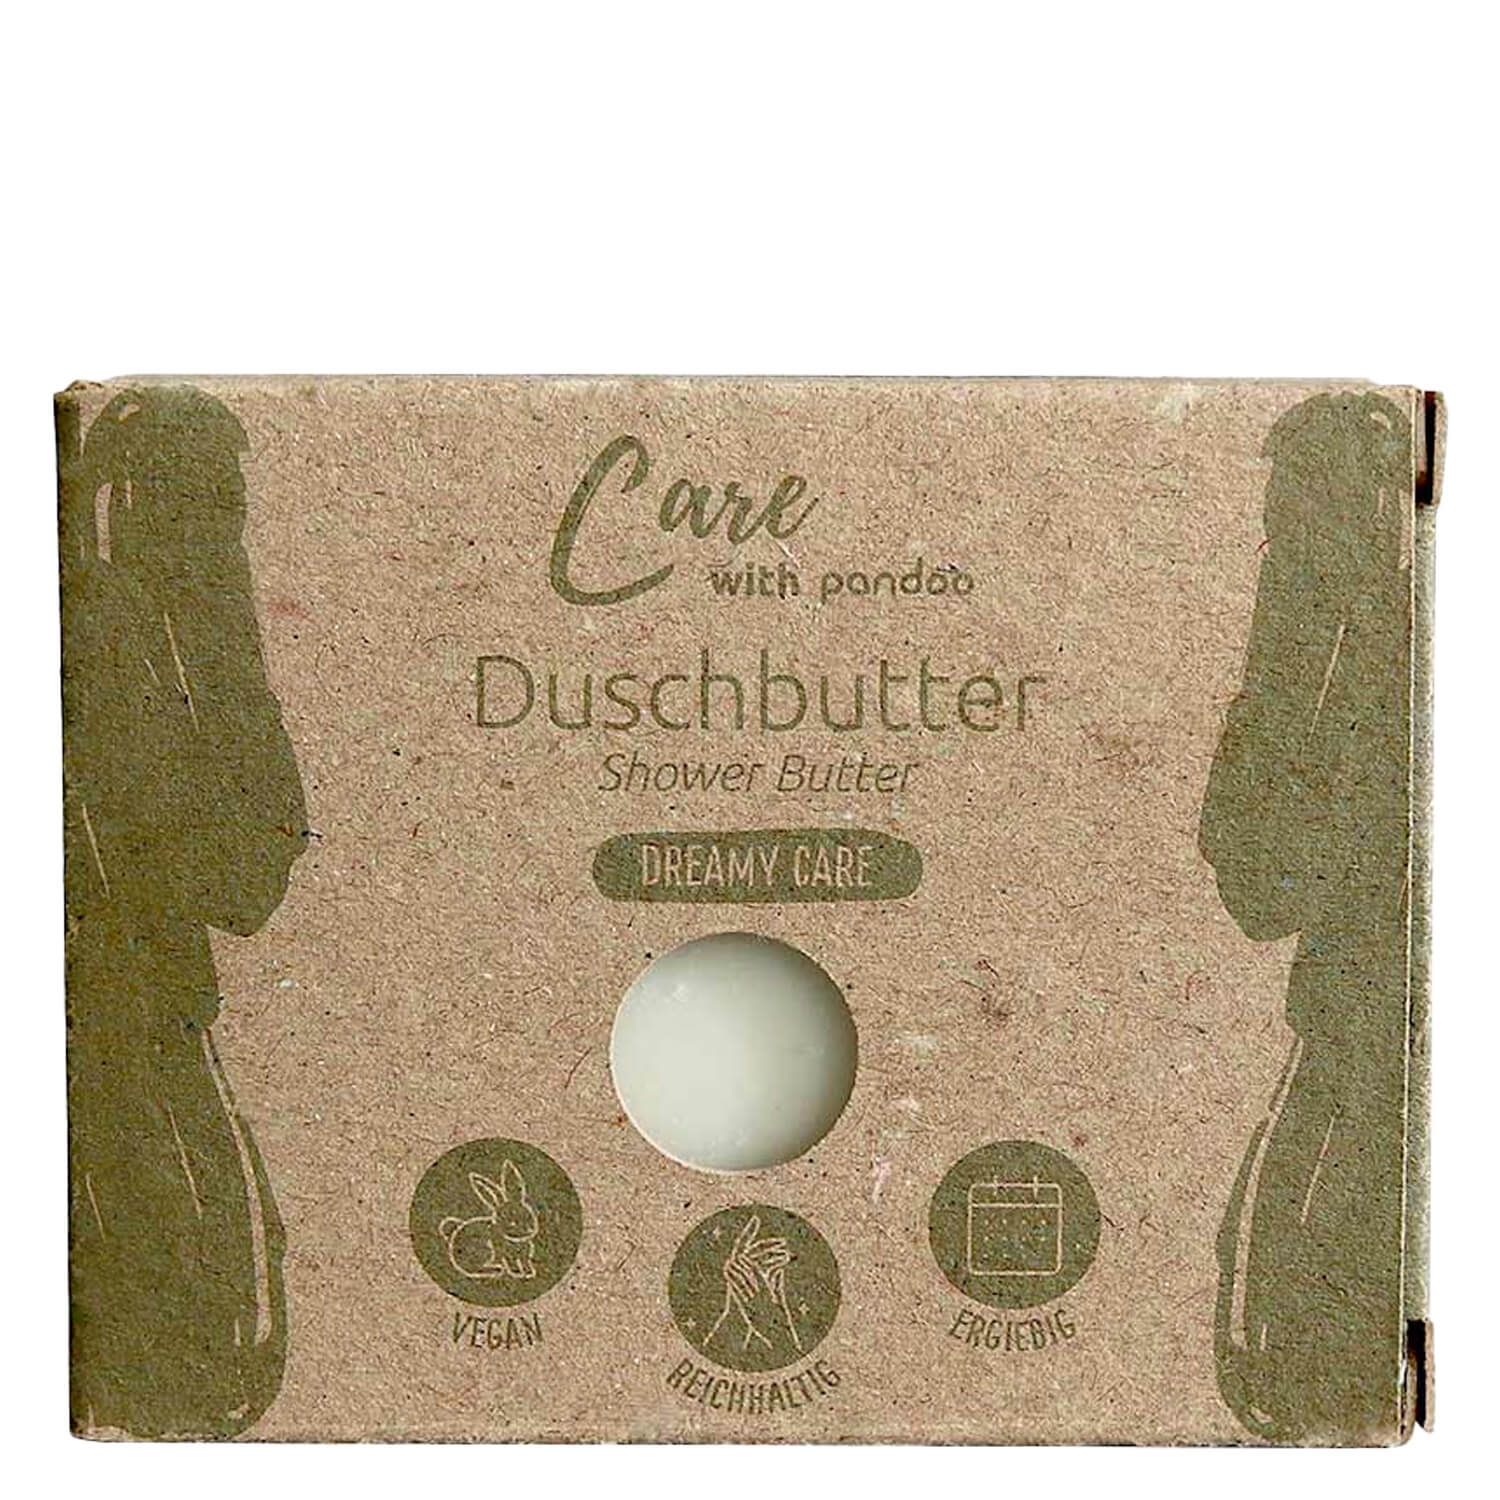 Product image from pandoo - Duschbutter Dreamy Care